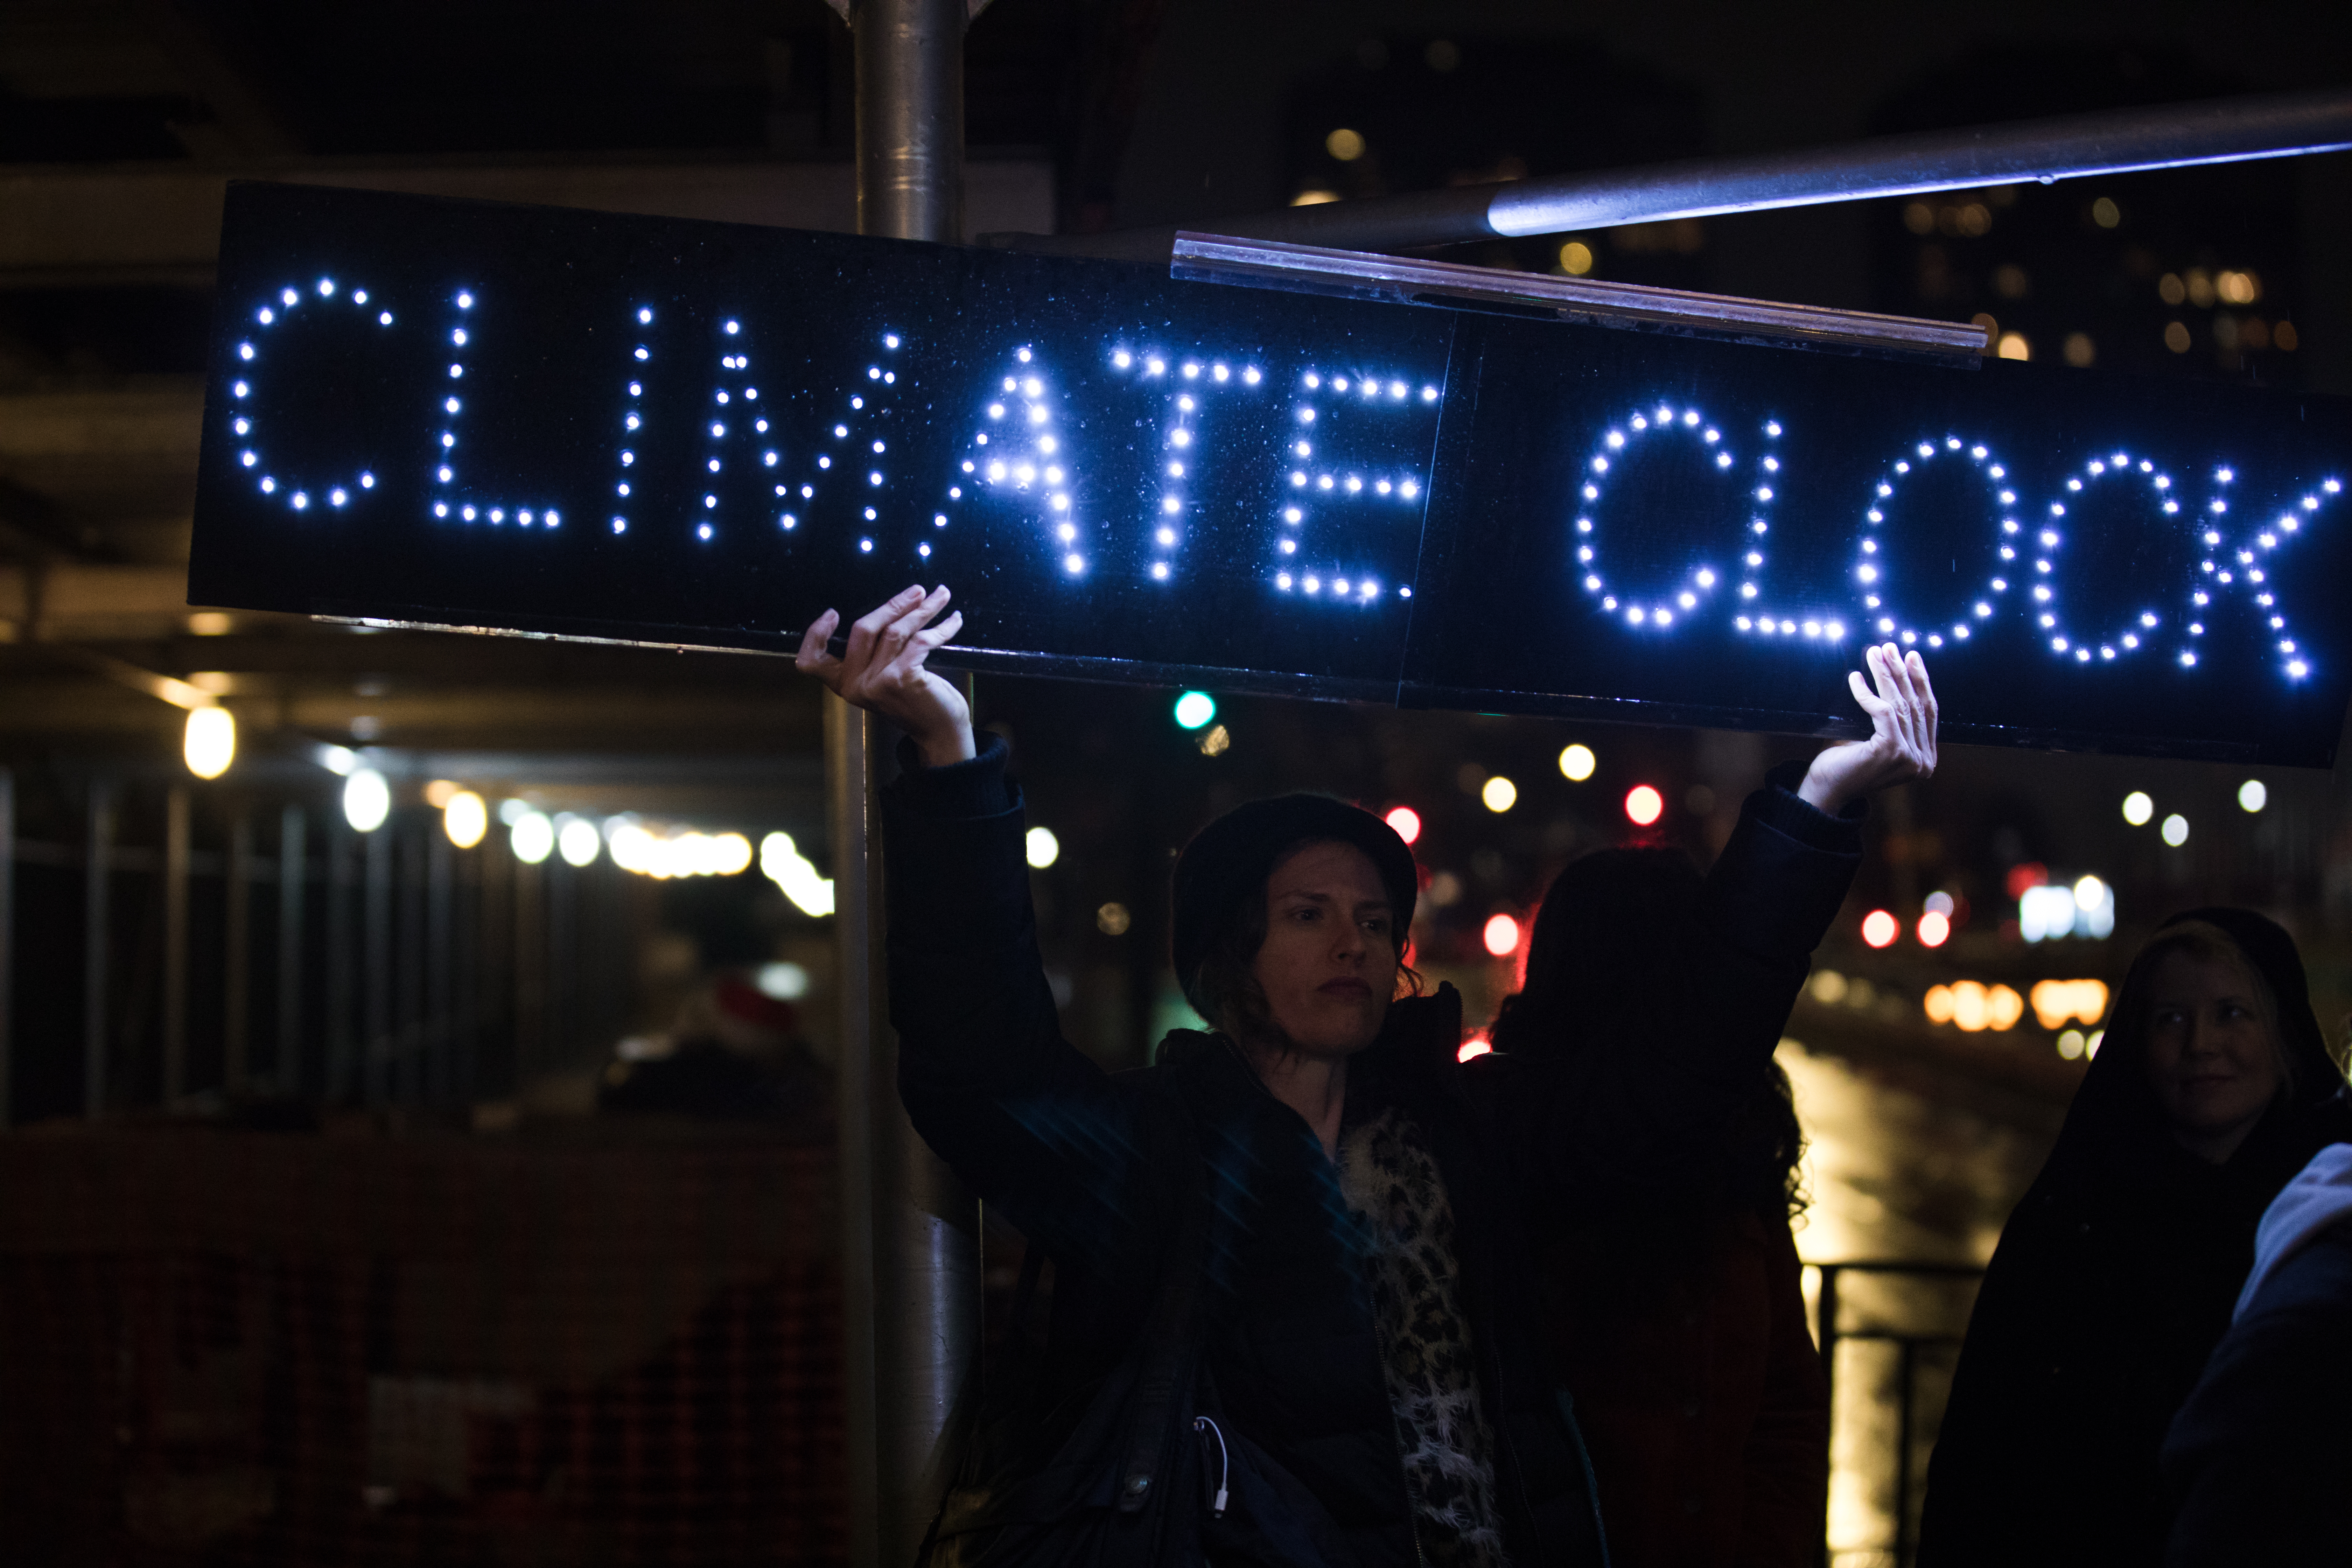 Soules takes part in a climate action outside the United Nations building. Photo: Paul Frangipane/Brooklyn Eagle